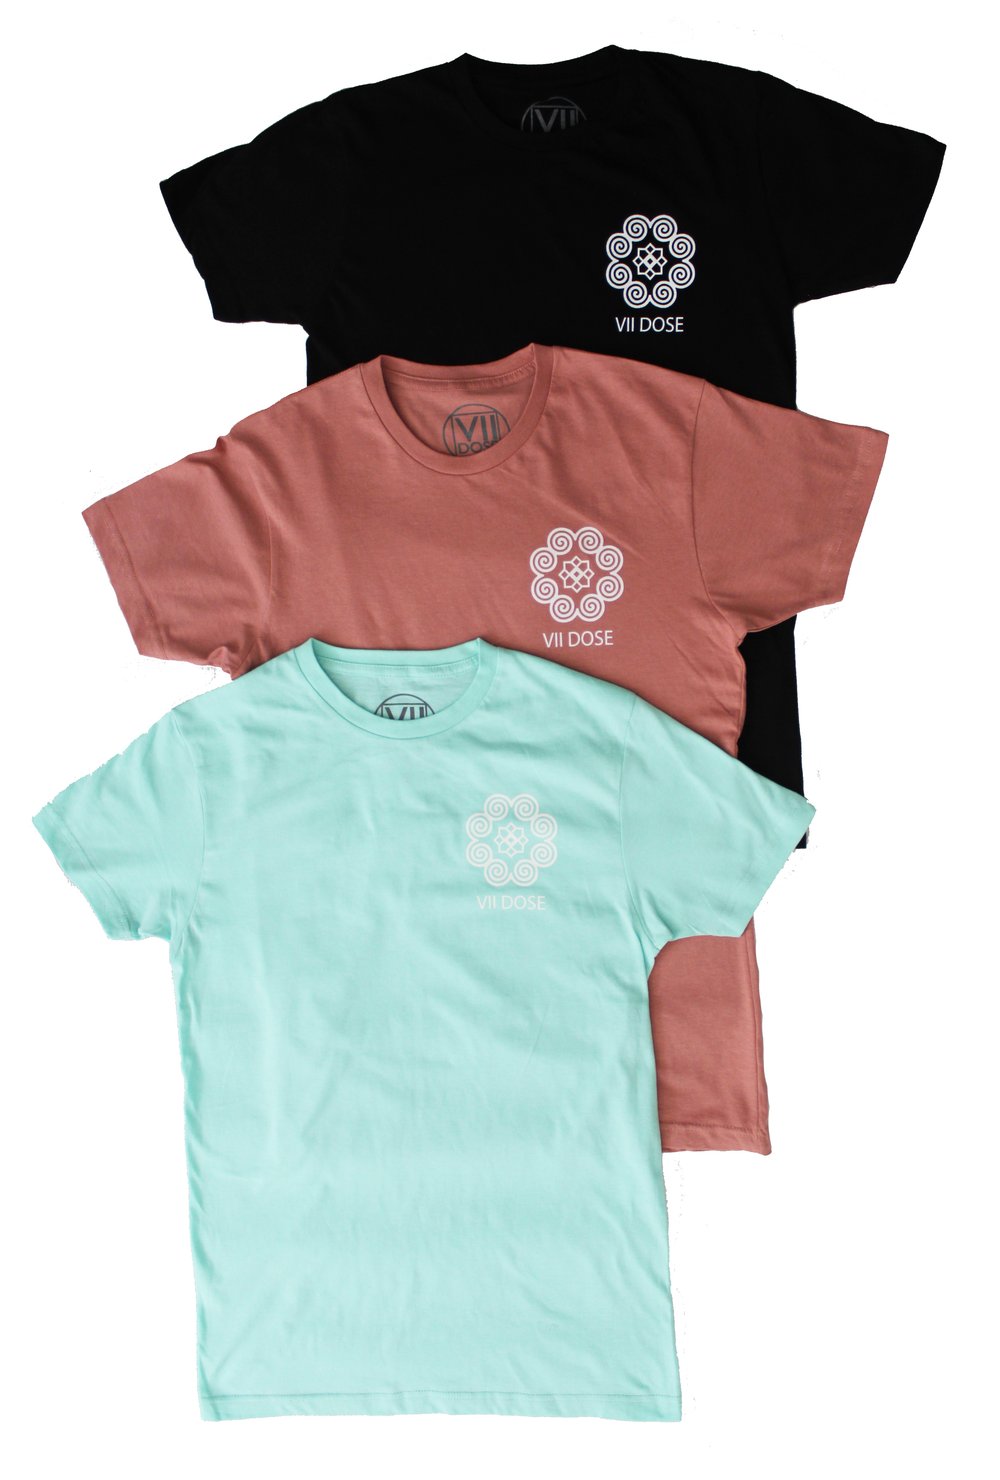 Image of "Roots & Culture" Logo Tee (Mint, Rose, & Black)